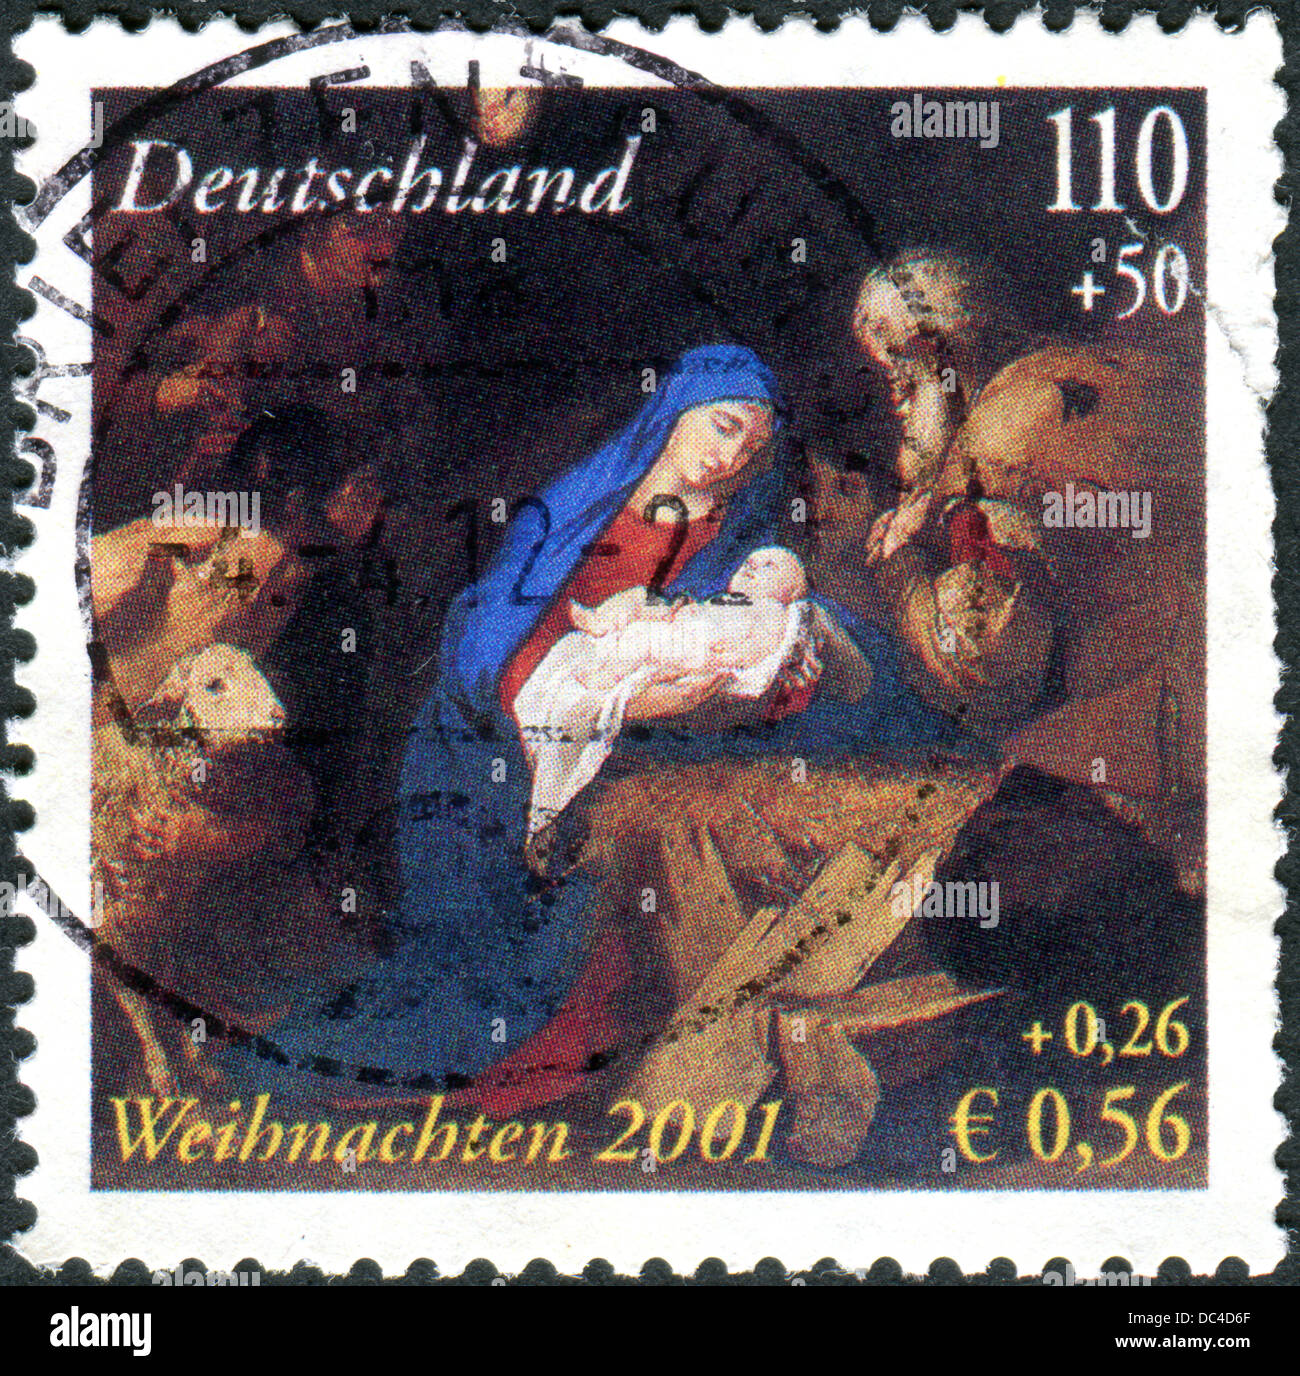 GERMANY - CIRCA 2001: A postage stamp printed in Germany, shows Adoration of the Shepherds by Jusepe de Ribera, circa 2001 Stock Photo